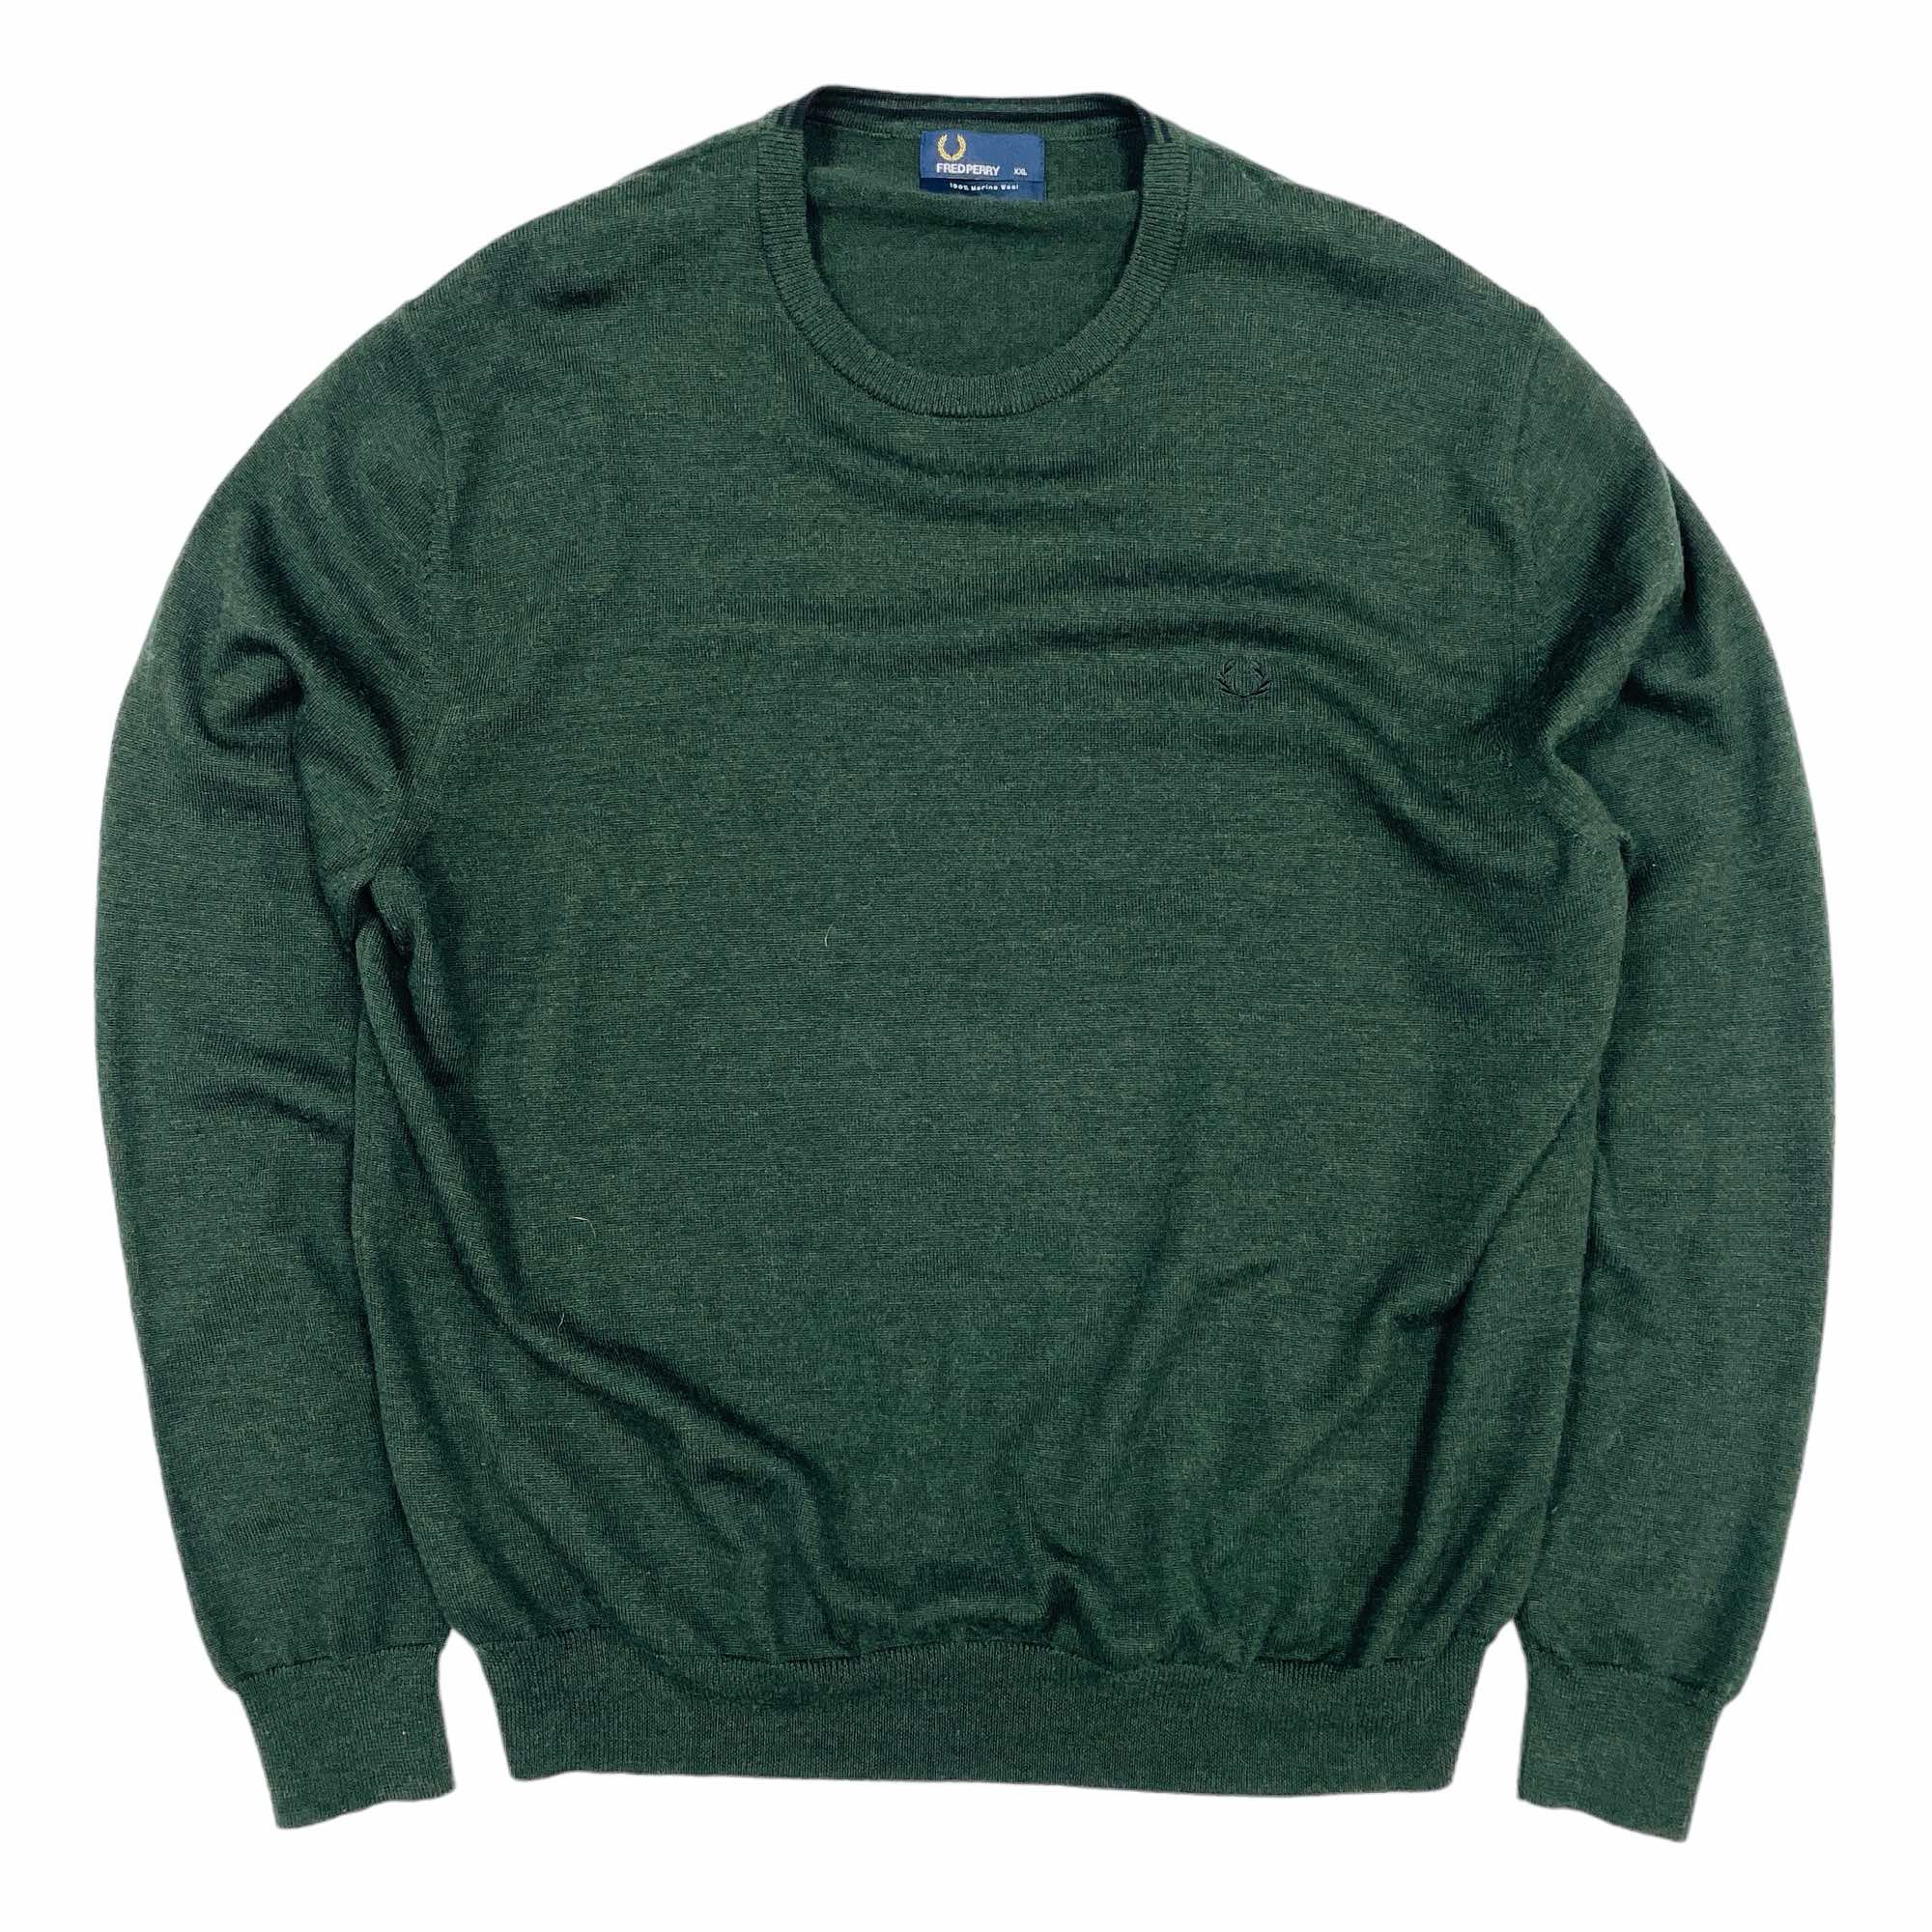 Fred Perry Knitted Jumper - 2XL